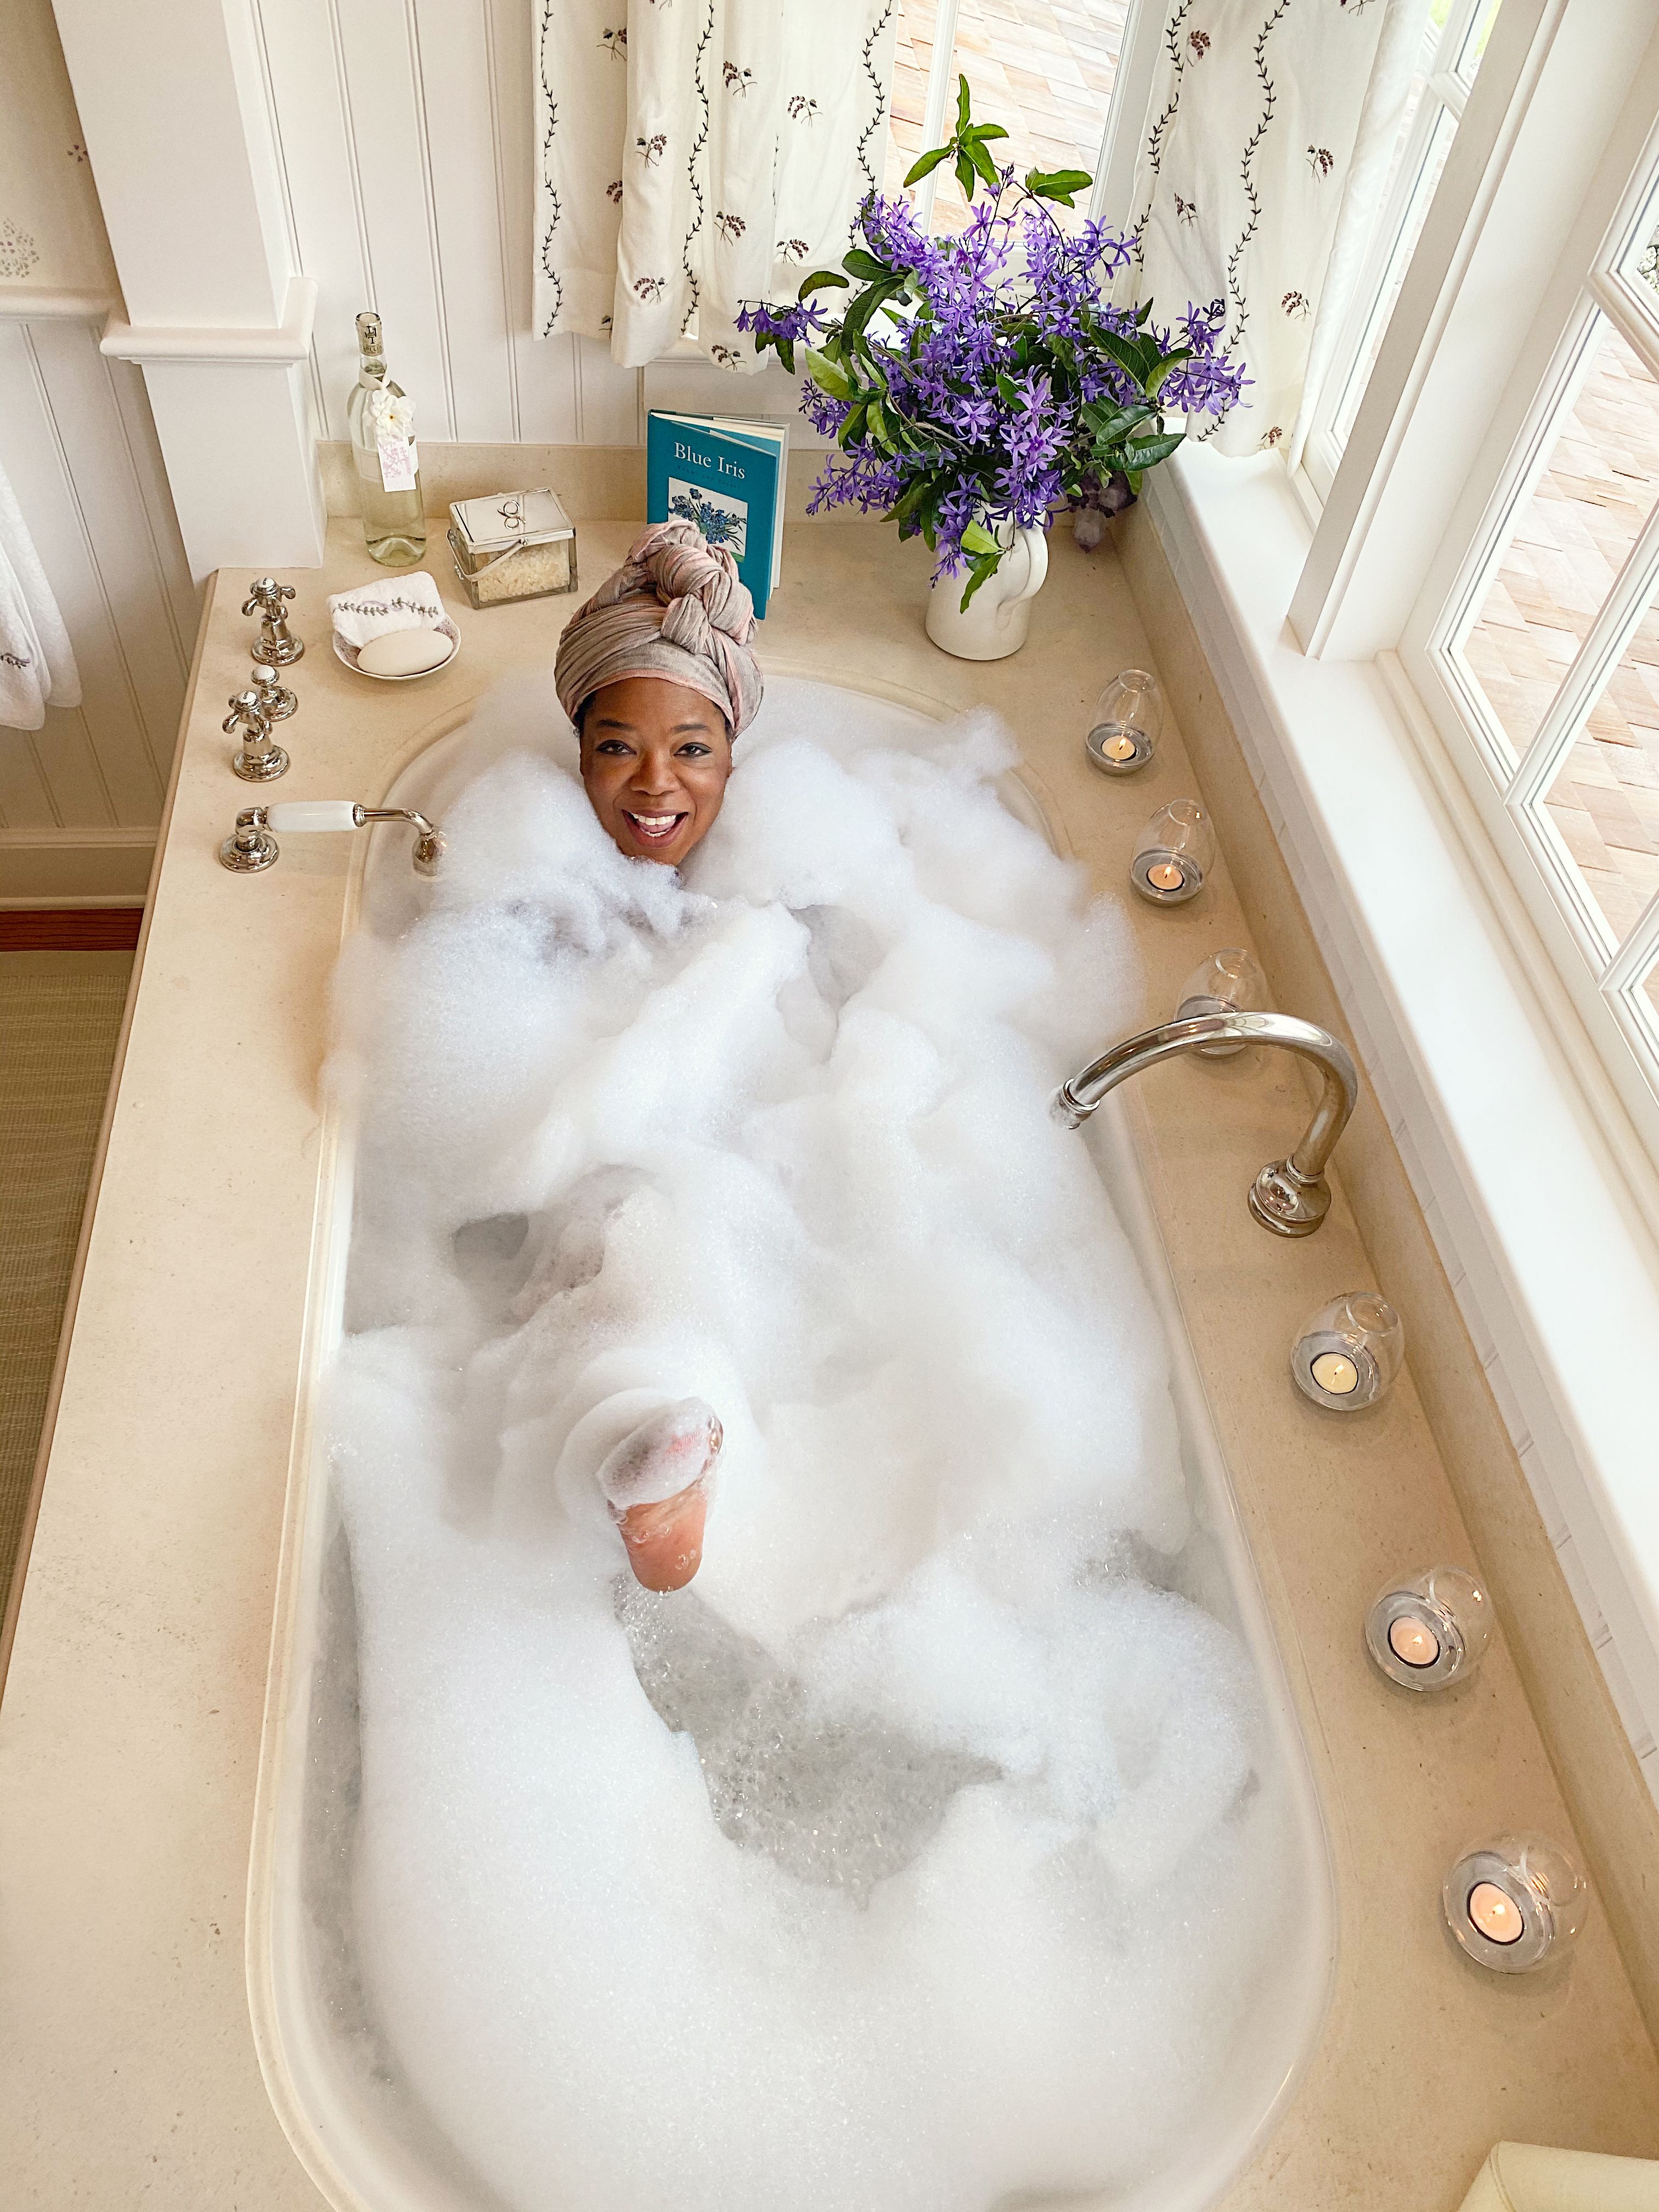 Oprah Reveals Her Bath Routine In, How Much Money Does It Cost To Fill A Bathtub